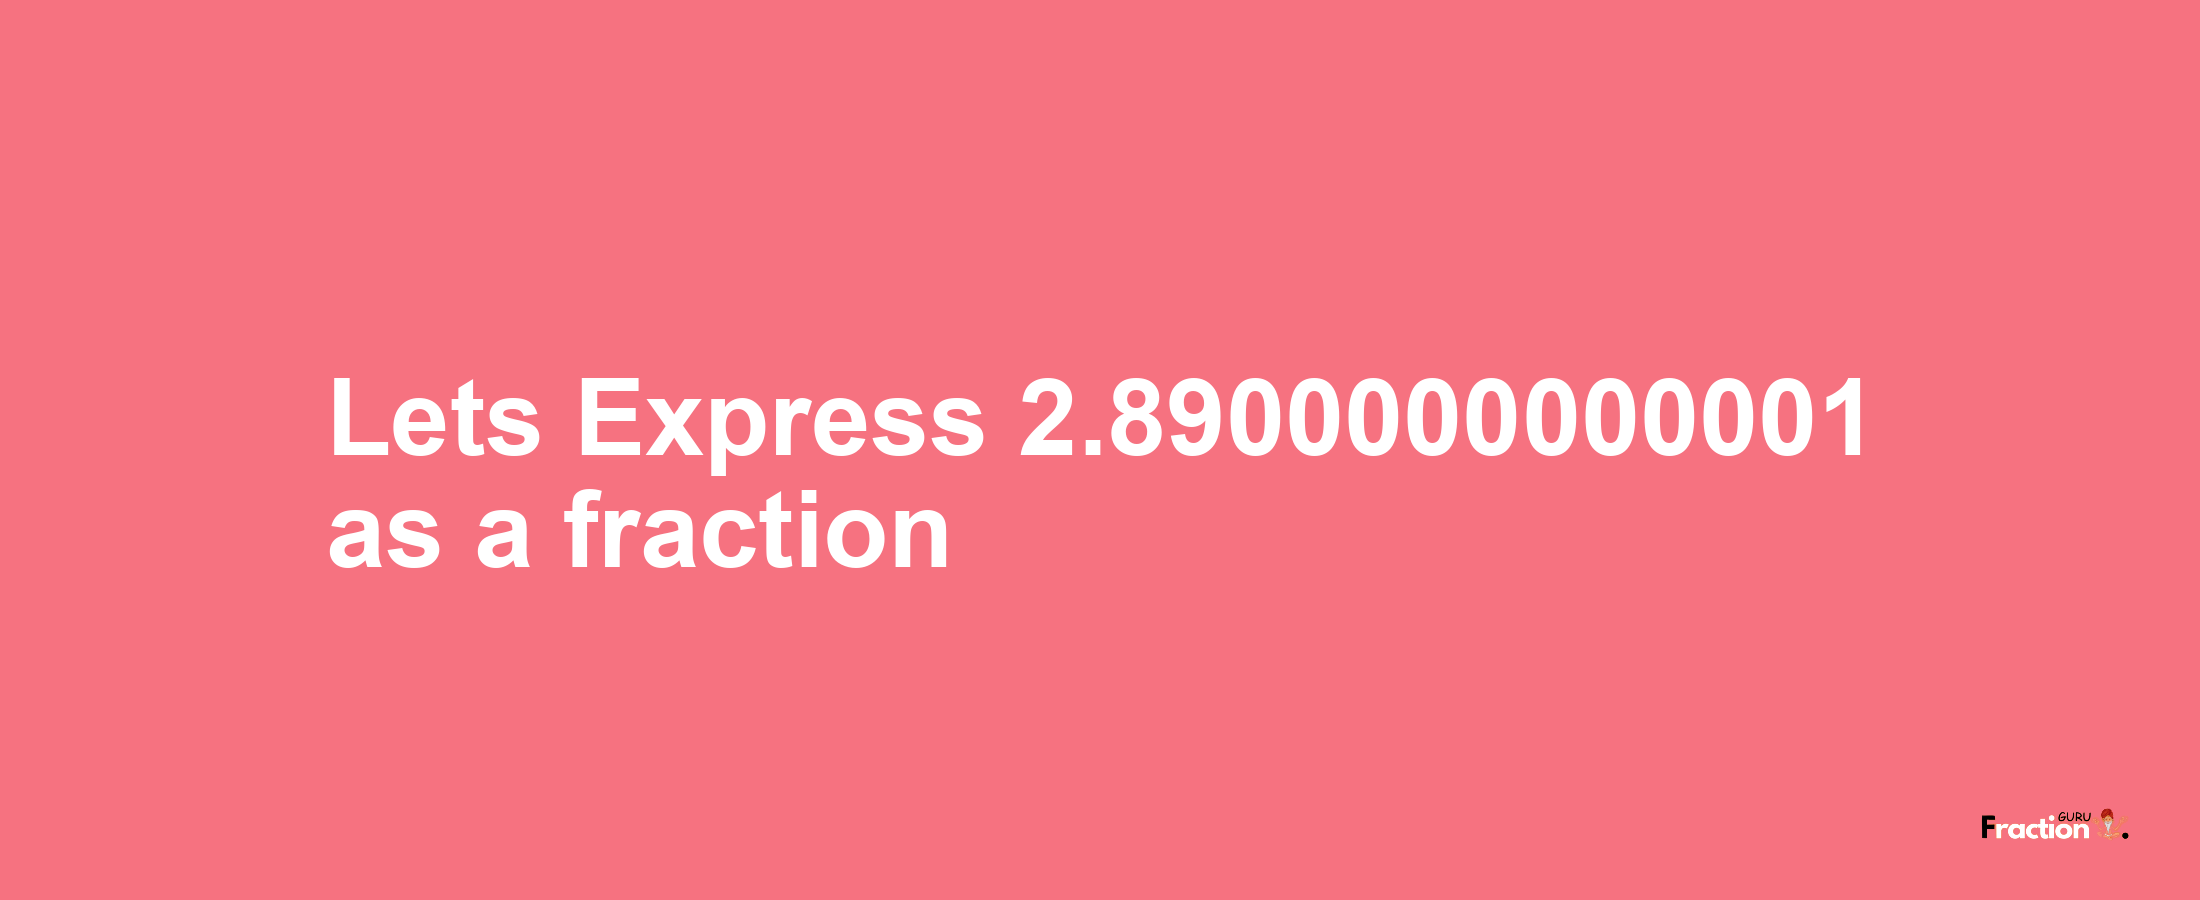 Lets Express 2.8900000000001 as afraction